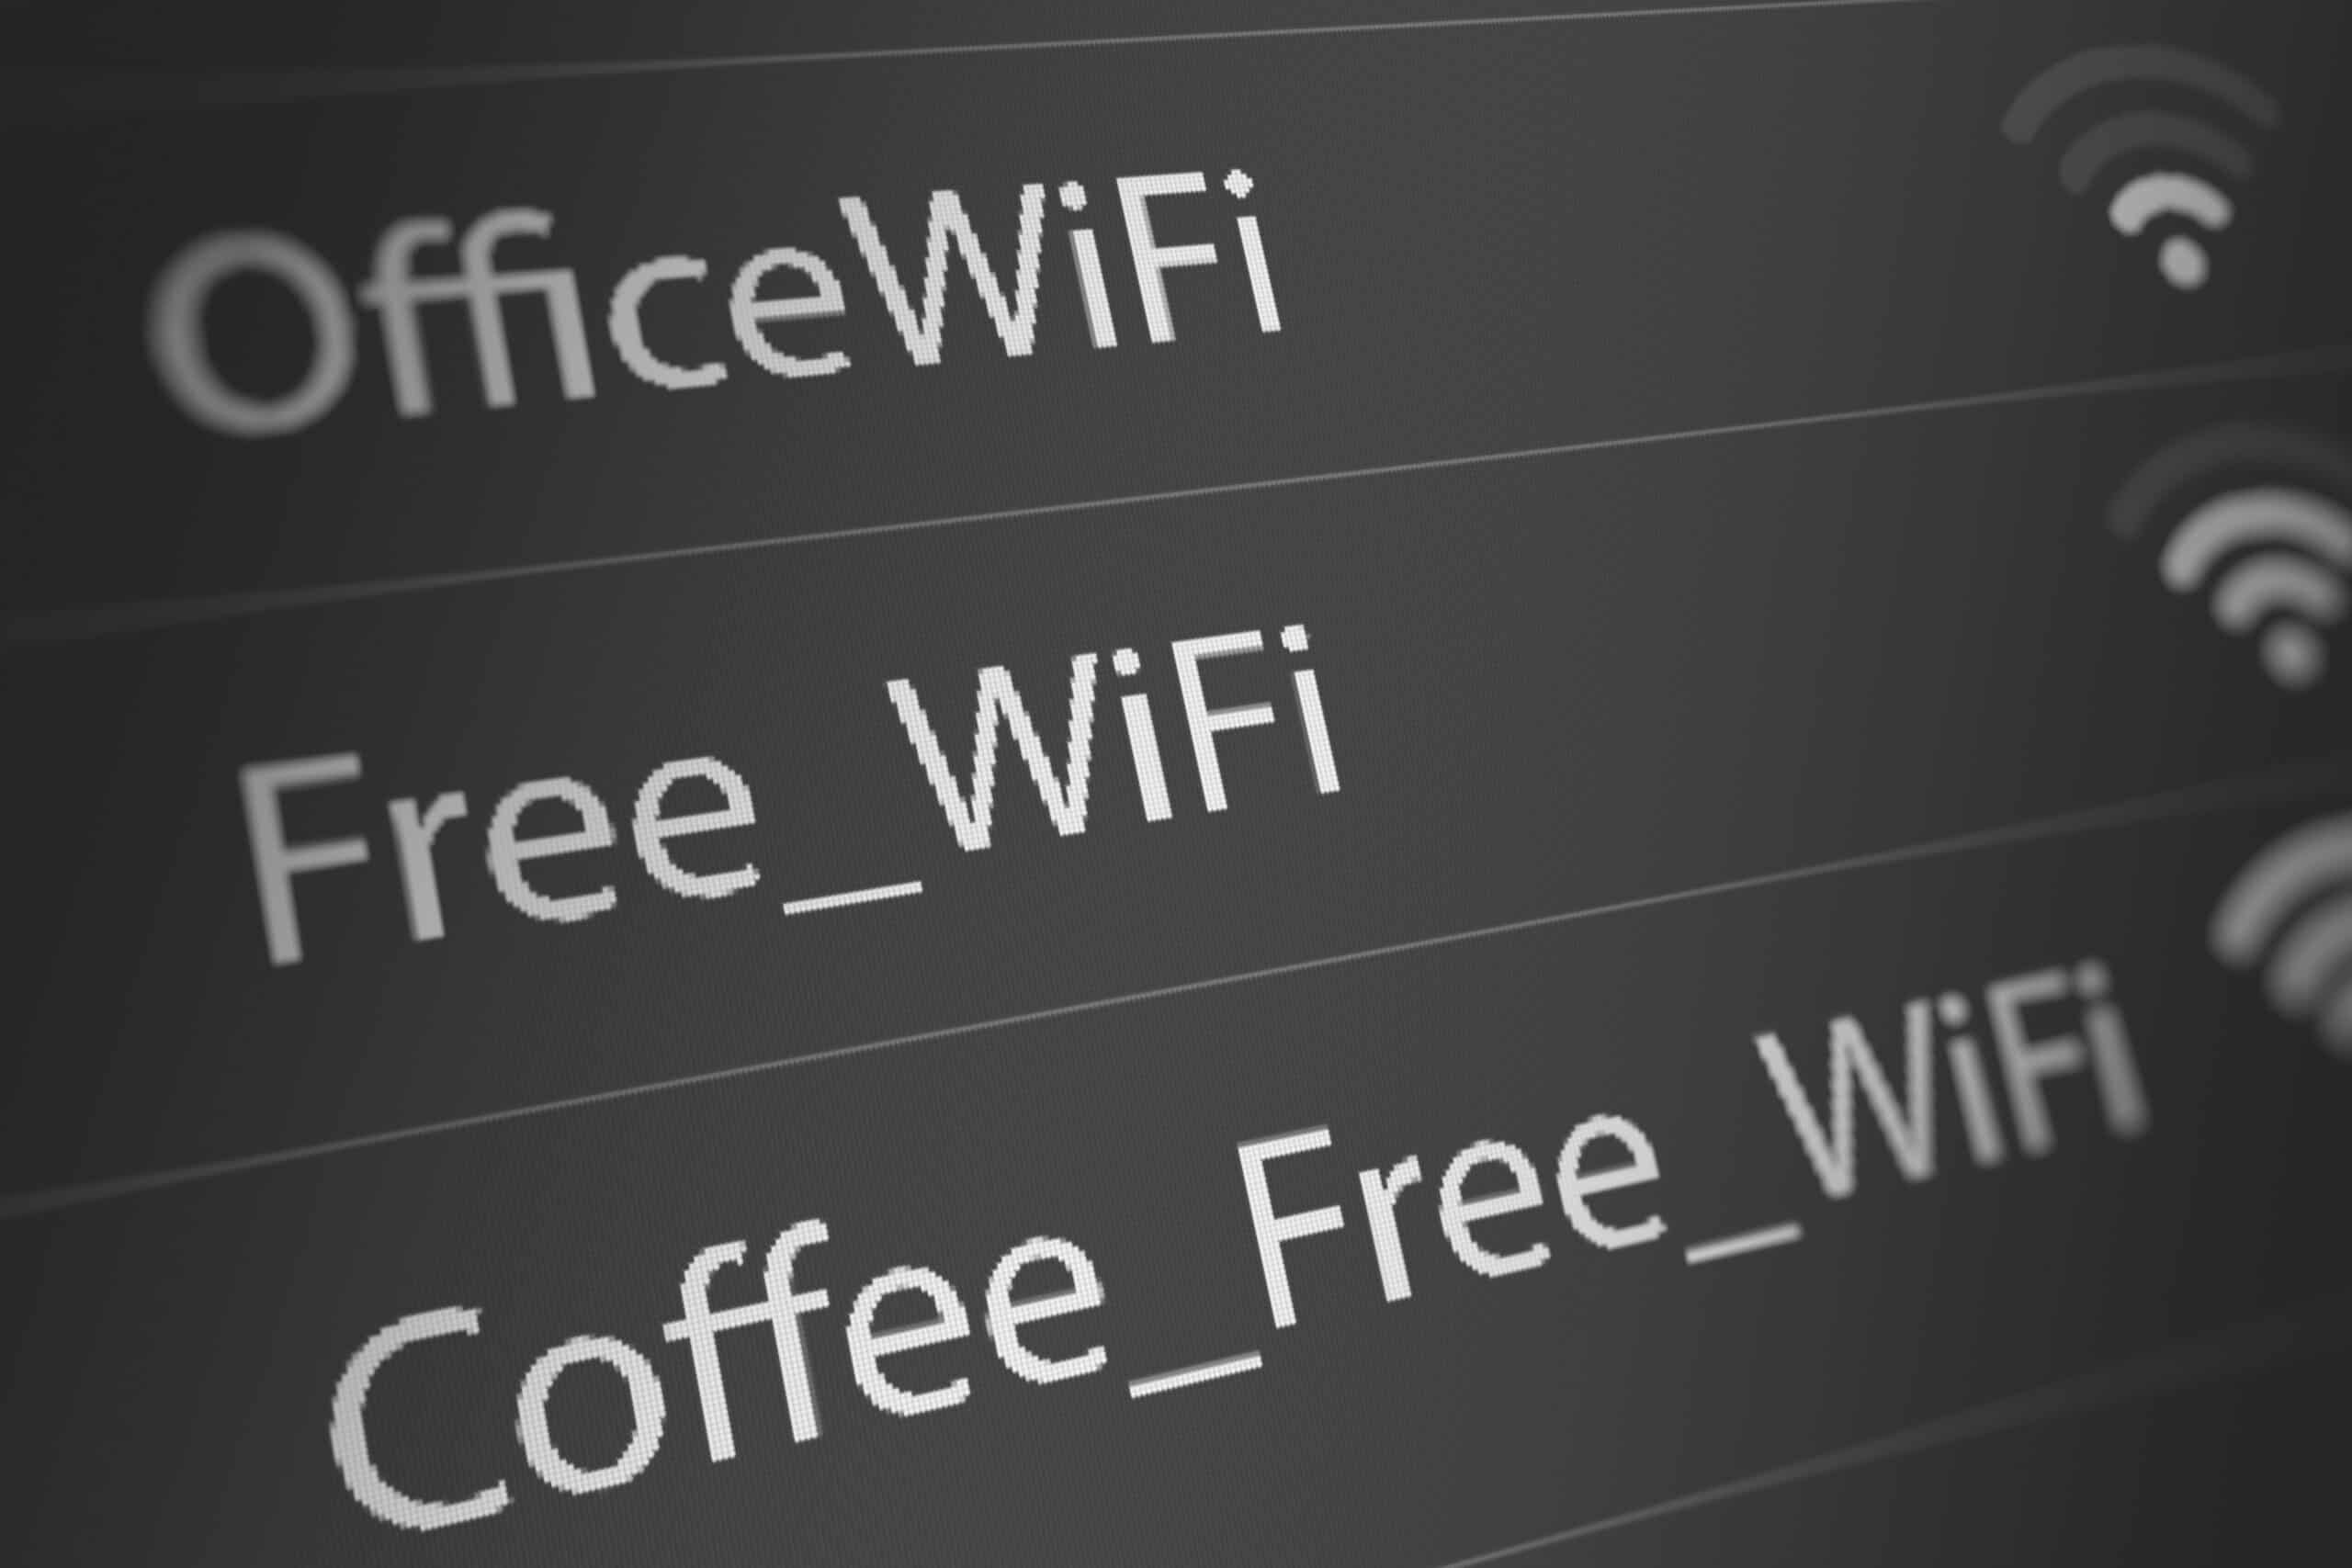 hilarious names for your Wi-Fi